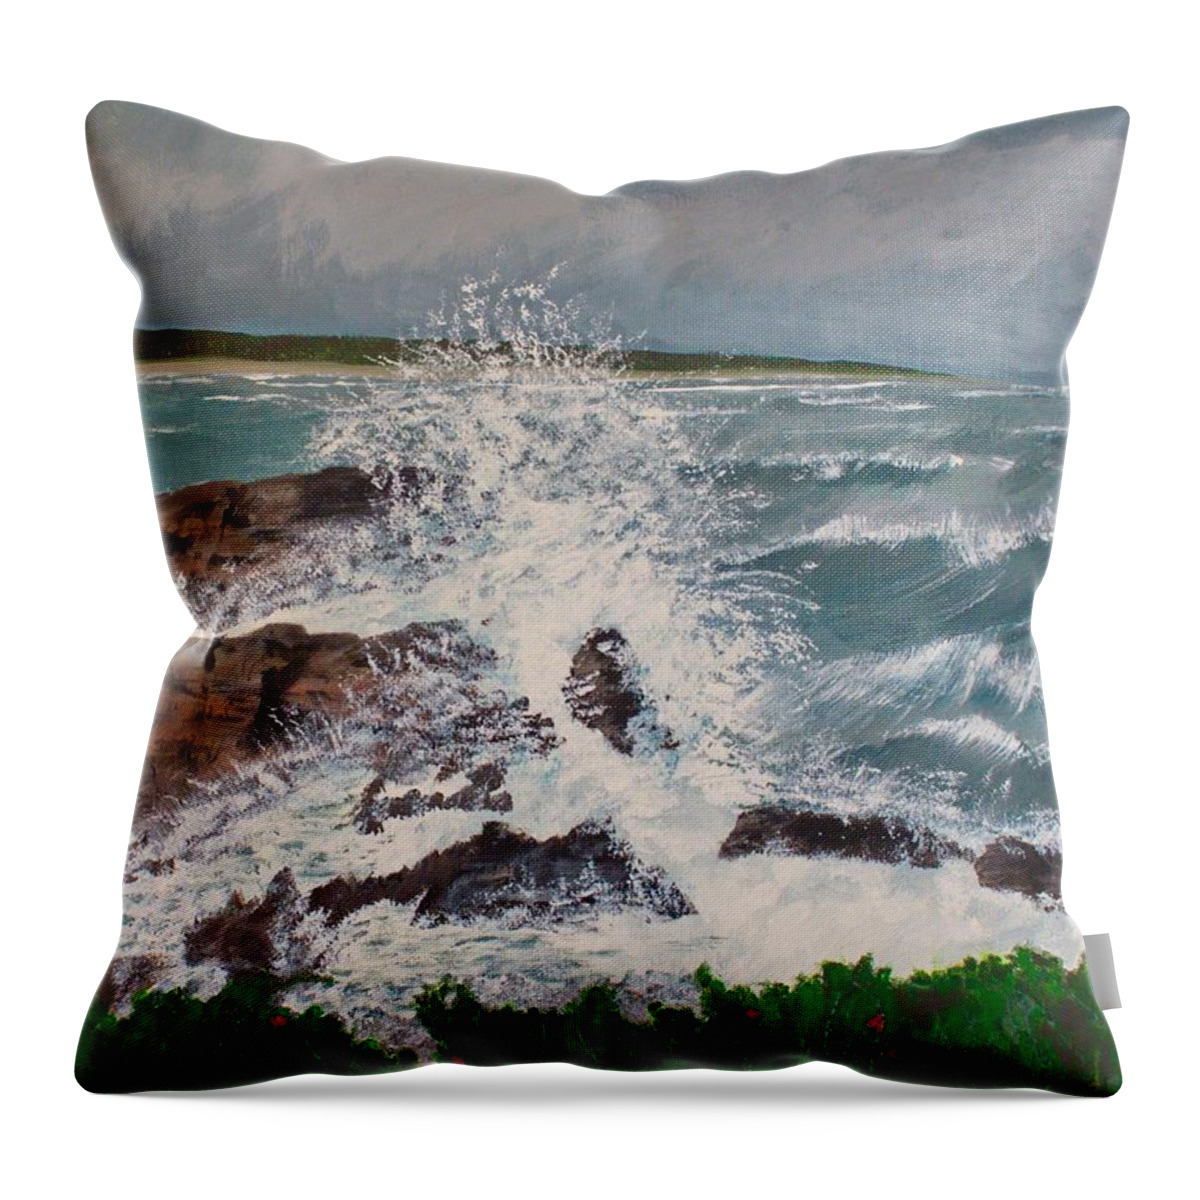 Ocean Landcape Throw Pillow featuring the painting Crescendo by Cynthia Morgan